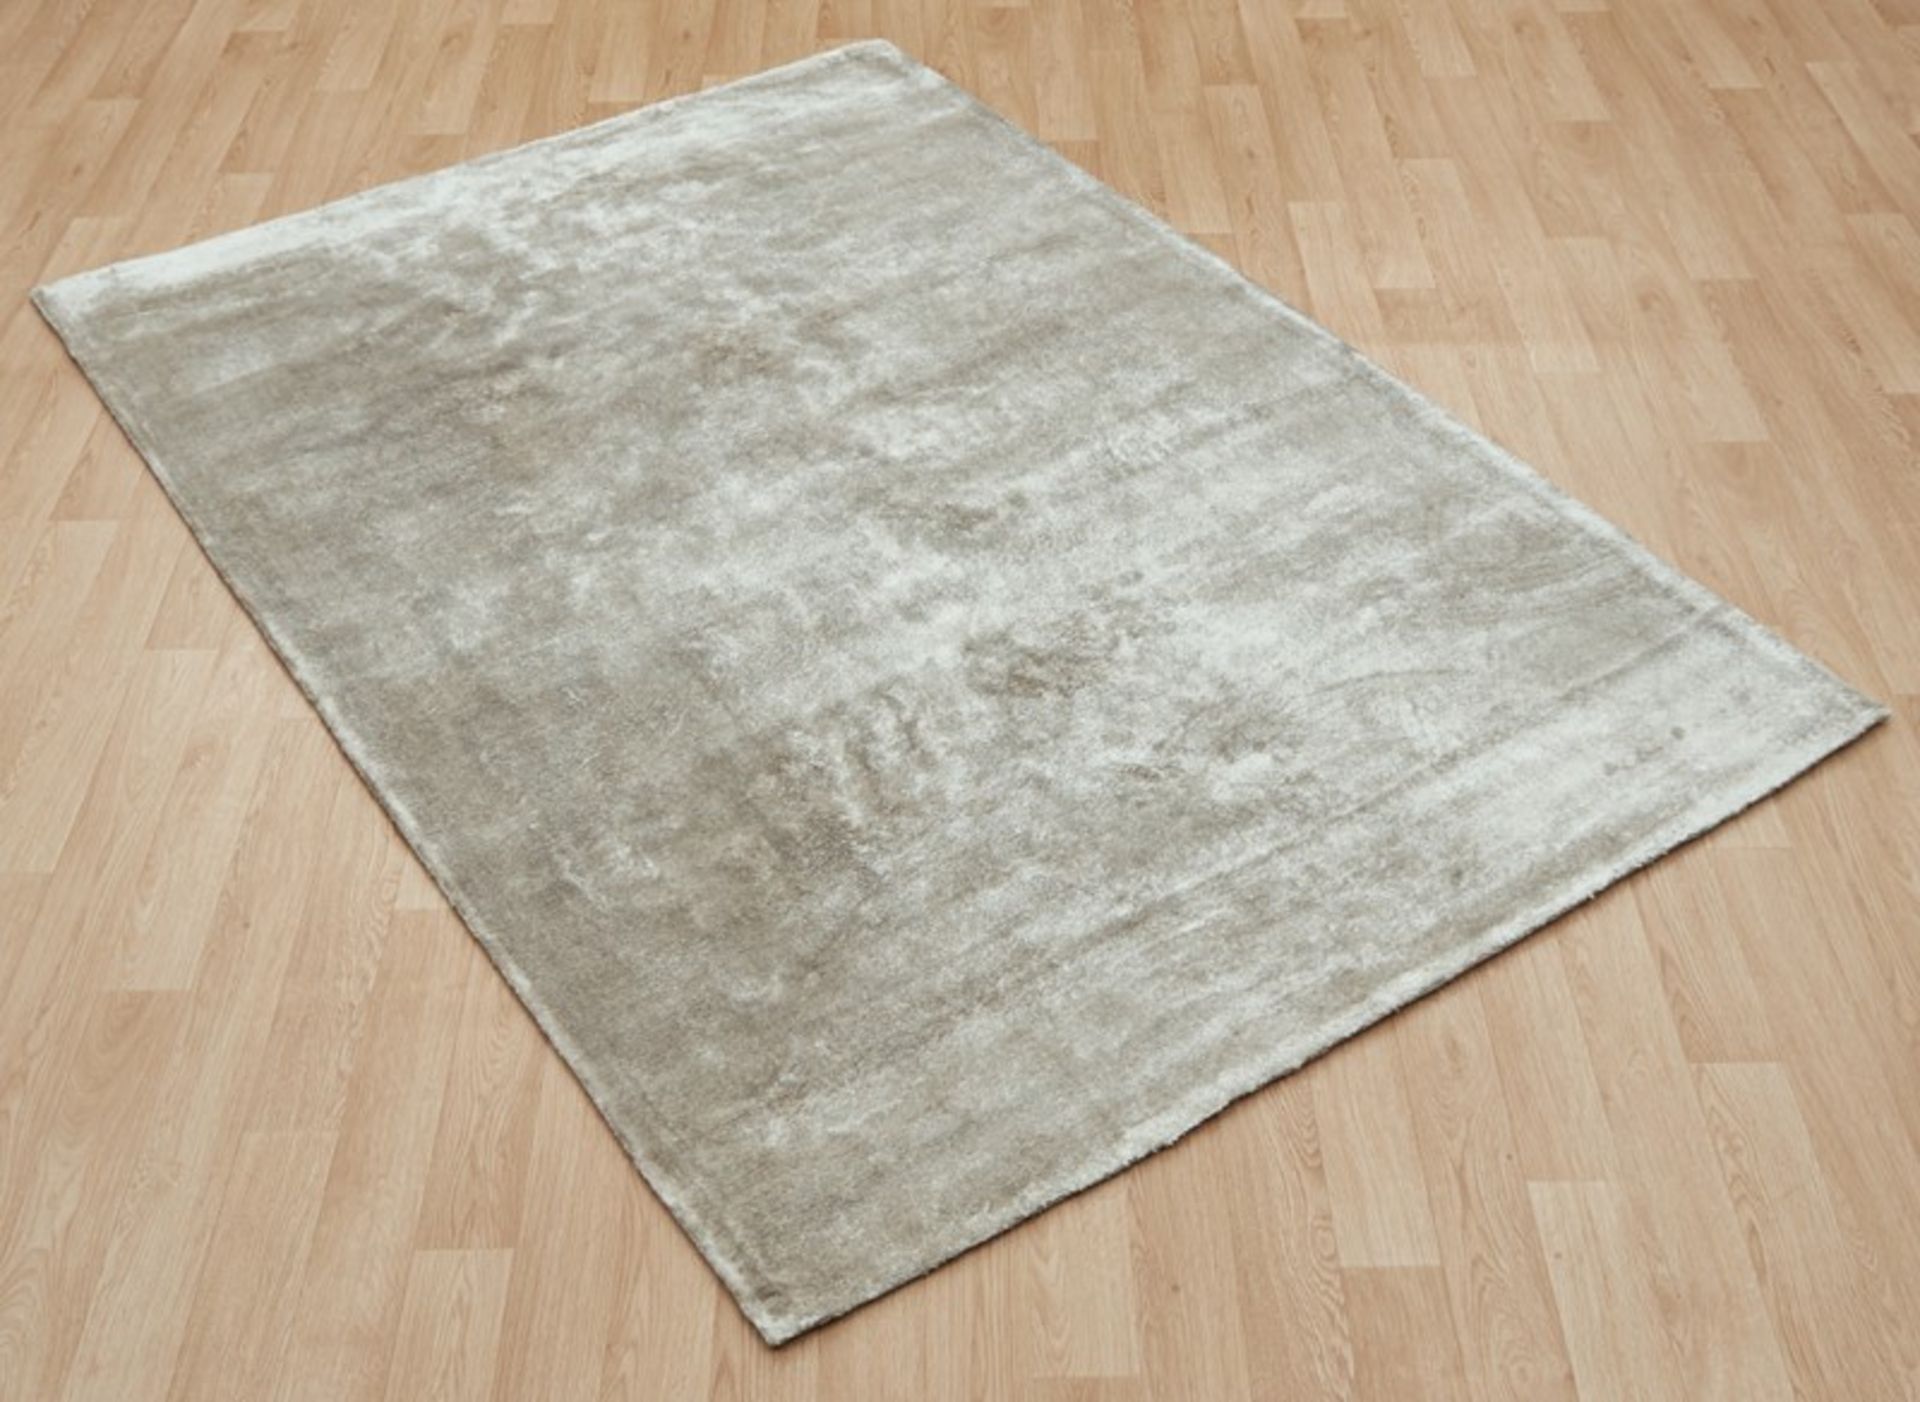 1 x Asiatic 'Dolce' Luxurious Hand-woven Rug In Silver - Handmade in India - 120x180cm - RRP £339.99